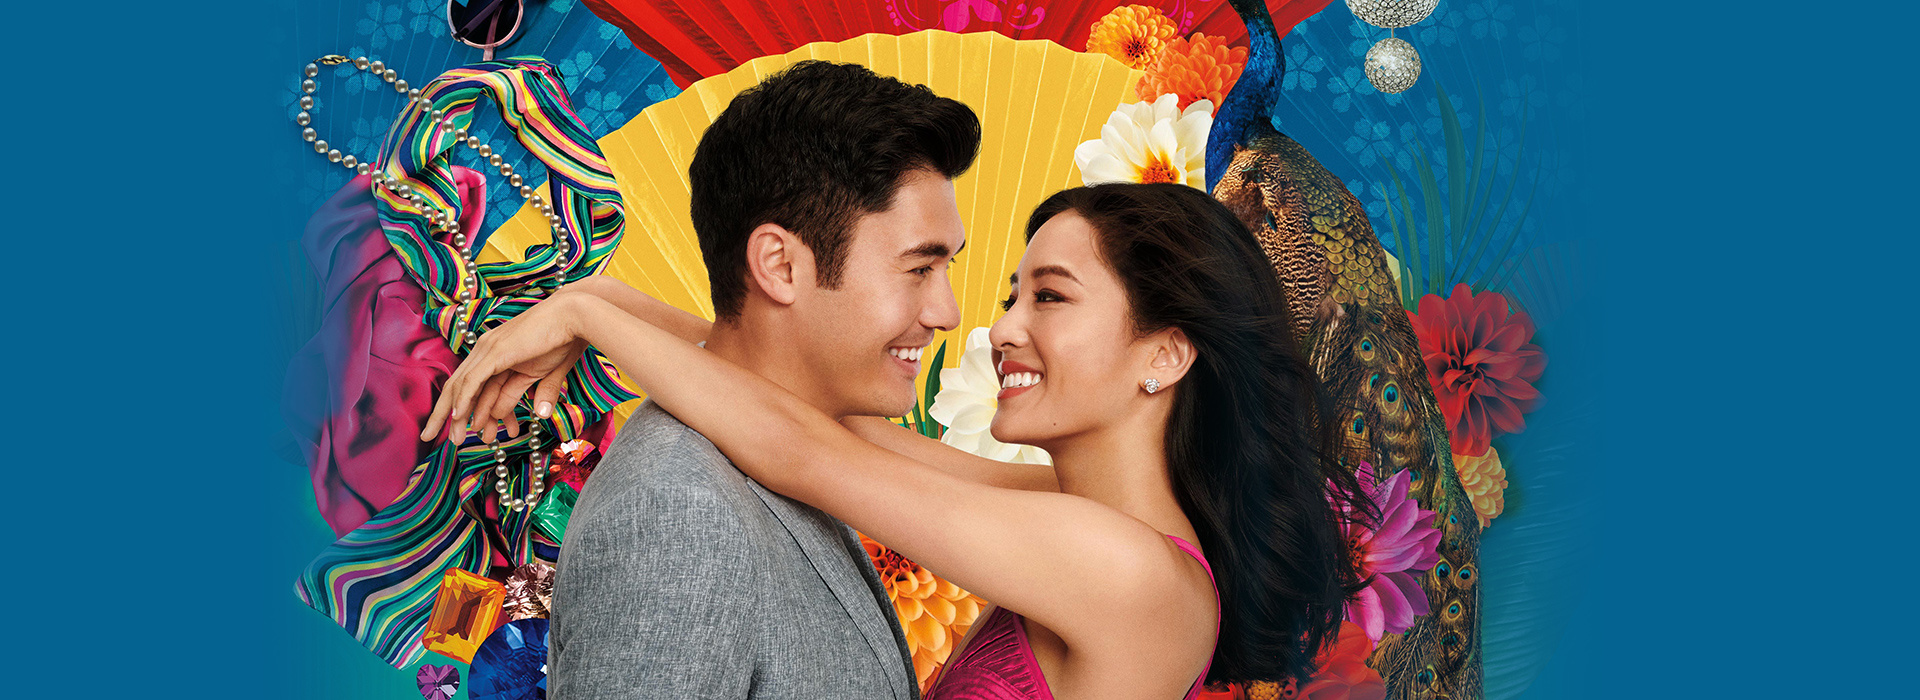 Movie poster Crazy Rich Asians